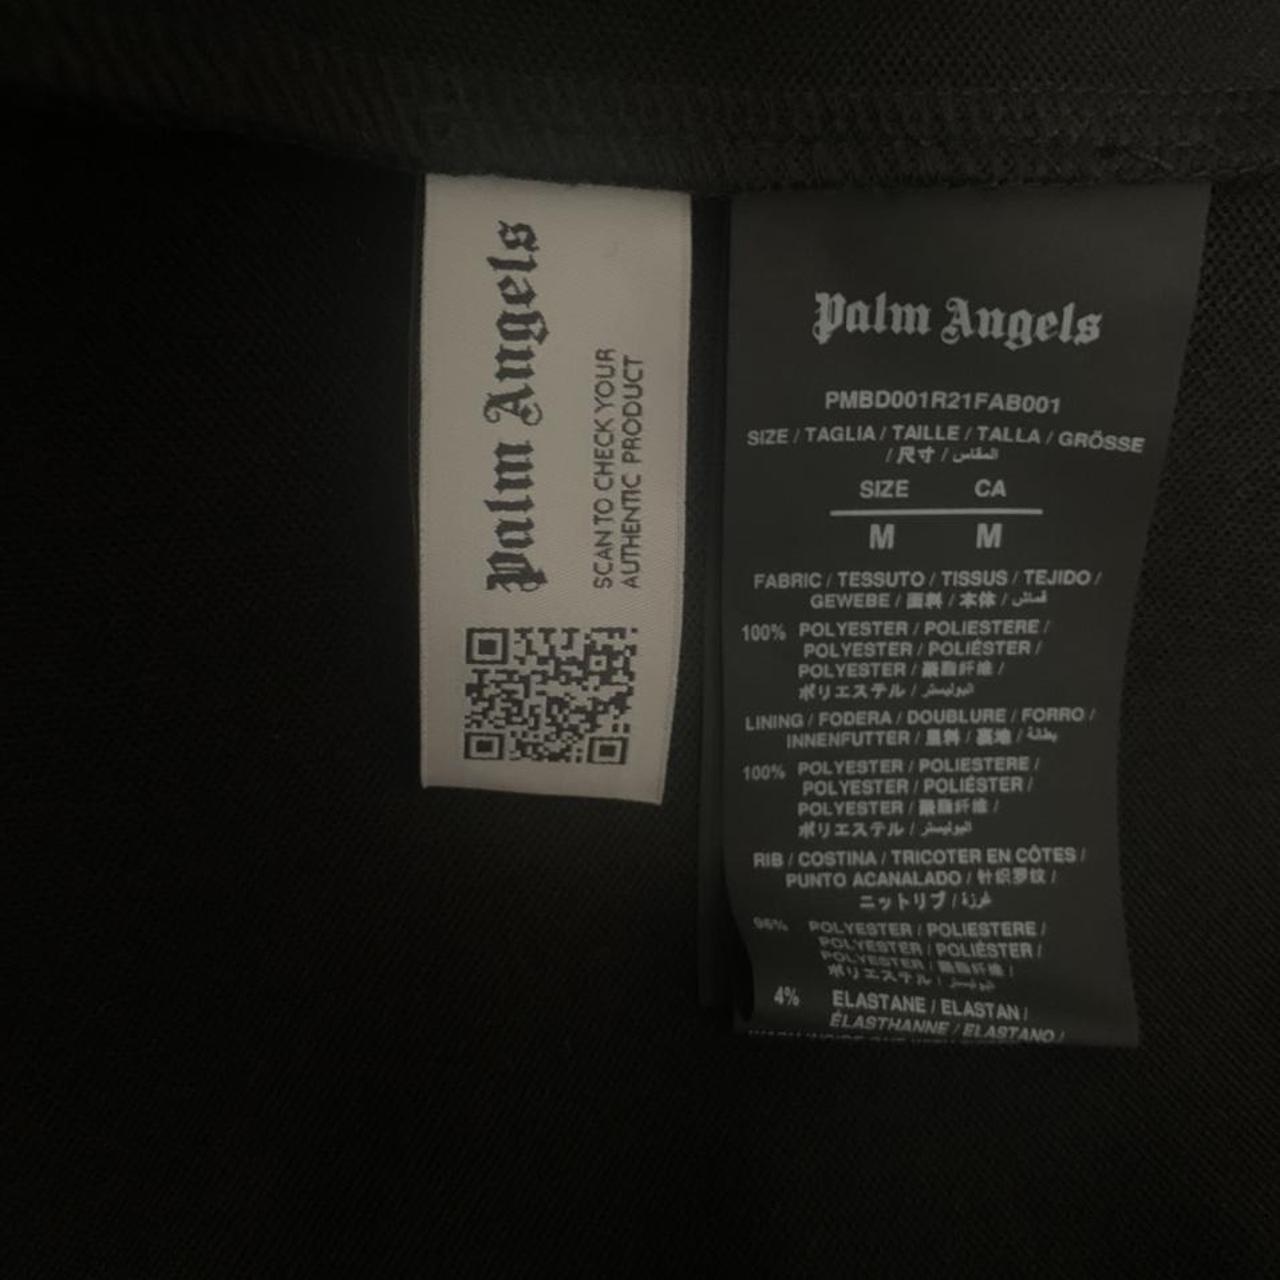 BRAND NEW AUTHENTIC PALM ANGELS TRACKSUIT TRACK... - Depop